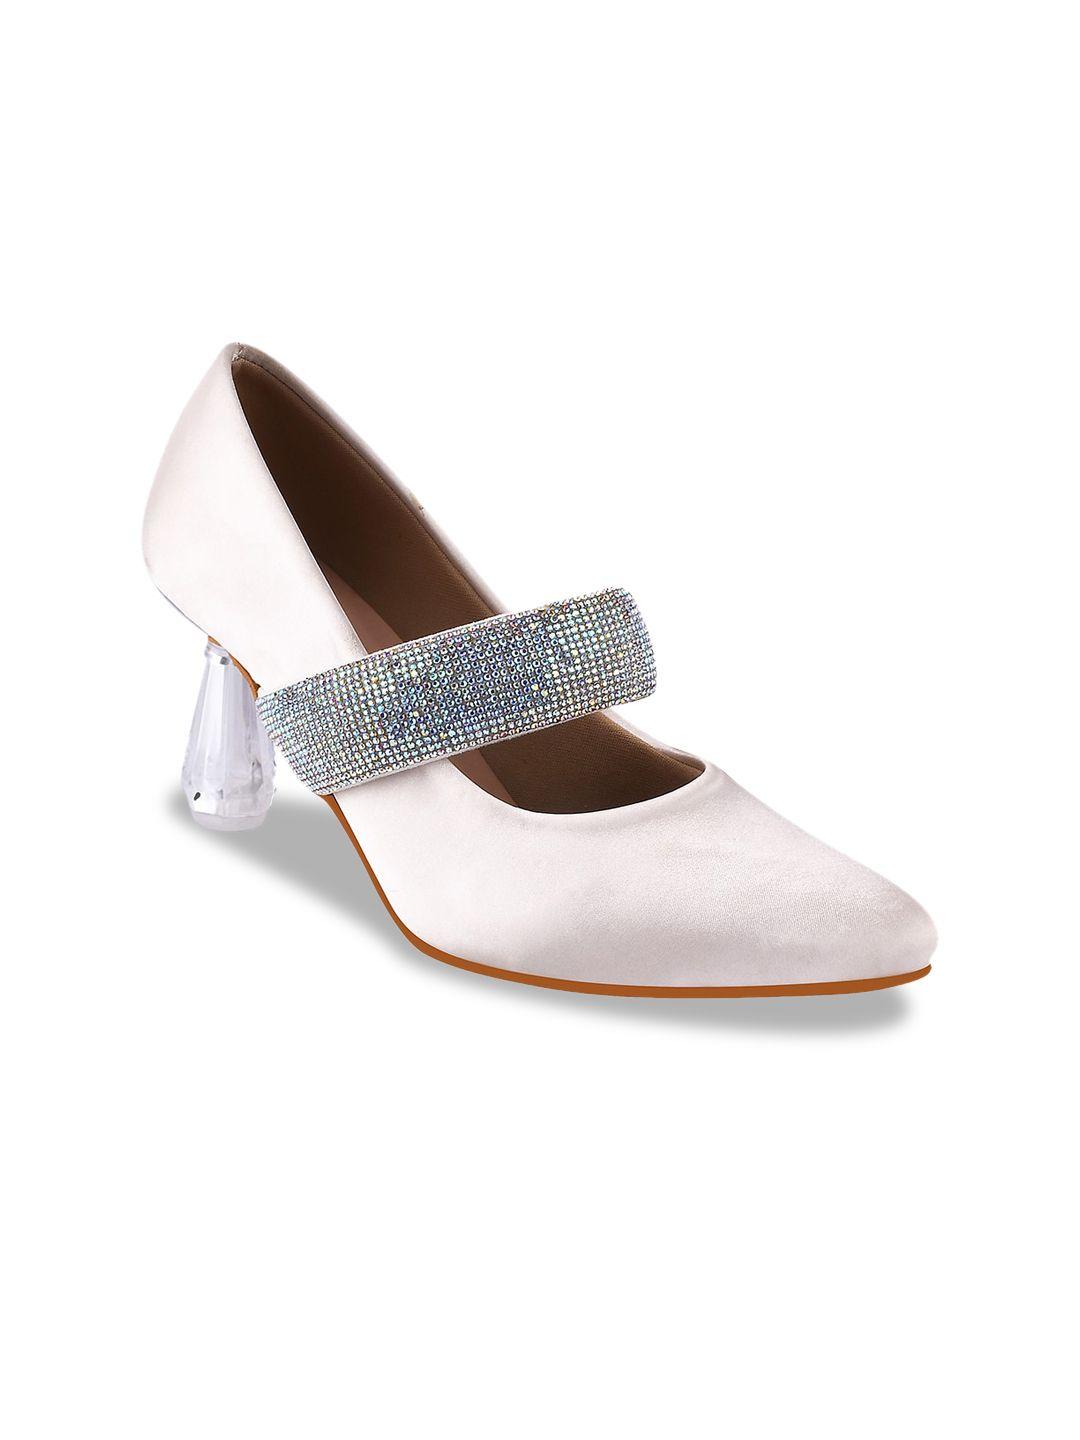 the-white-pole-pointed-toe-embellished-party-block-pumps